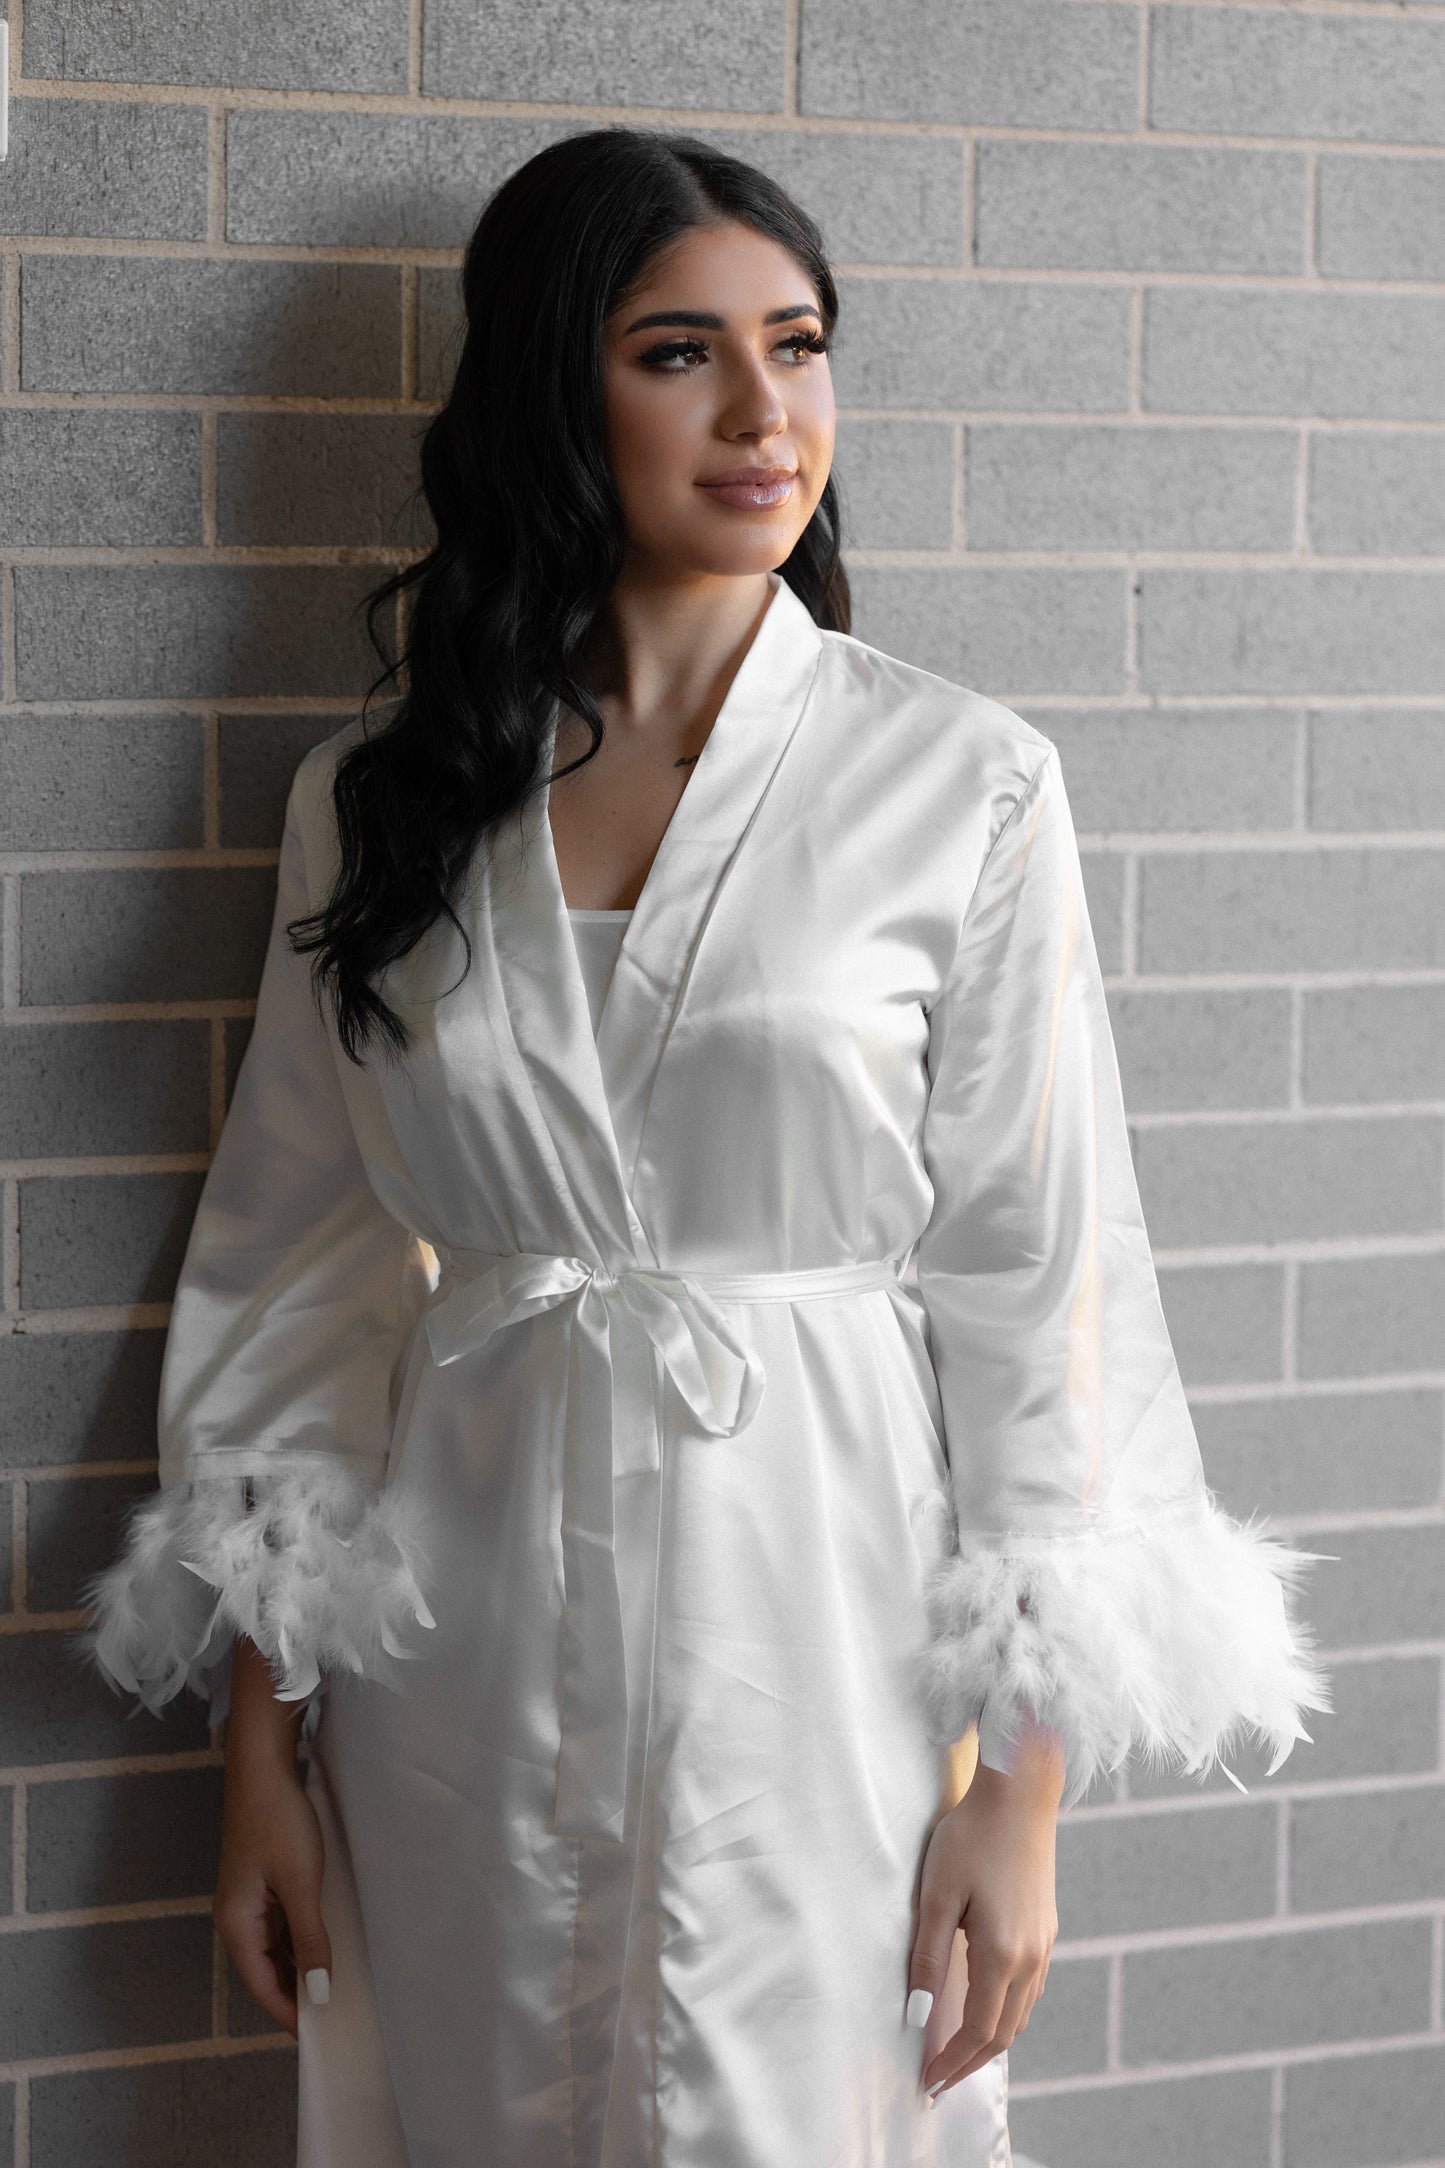 Bride in luxurious white robe posing for a photo